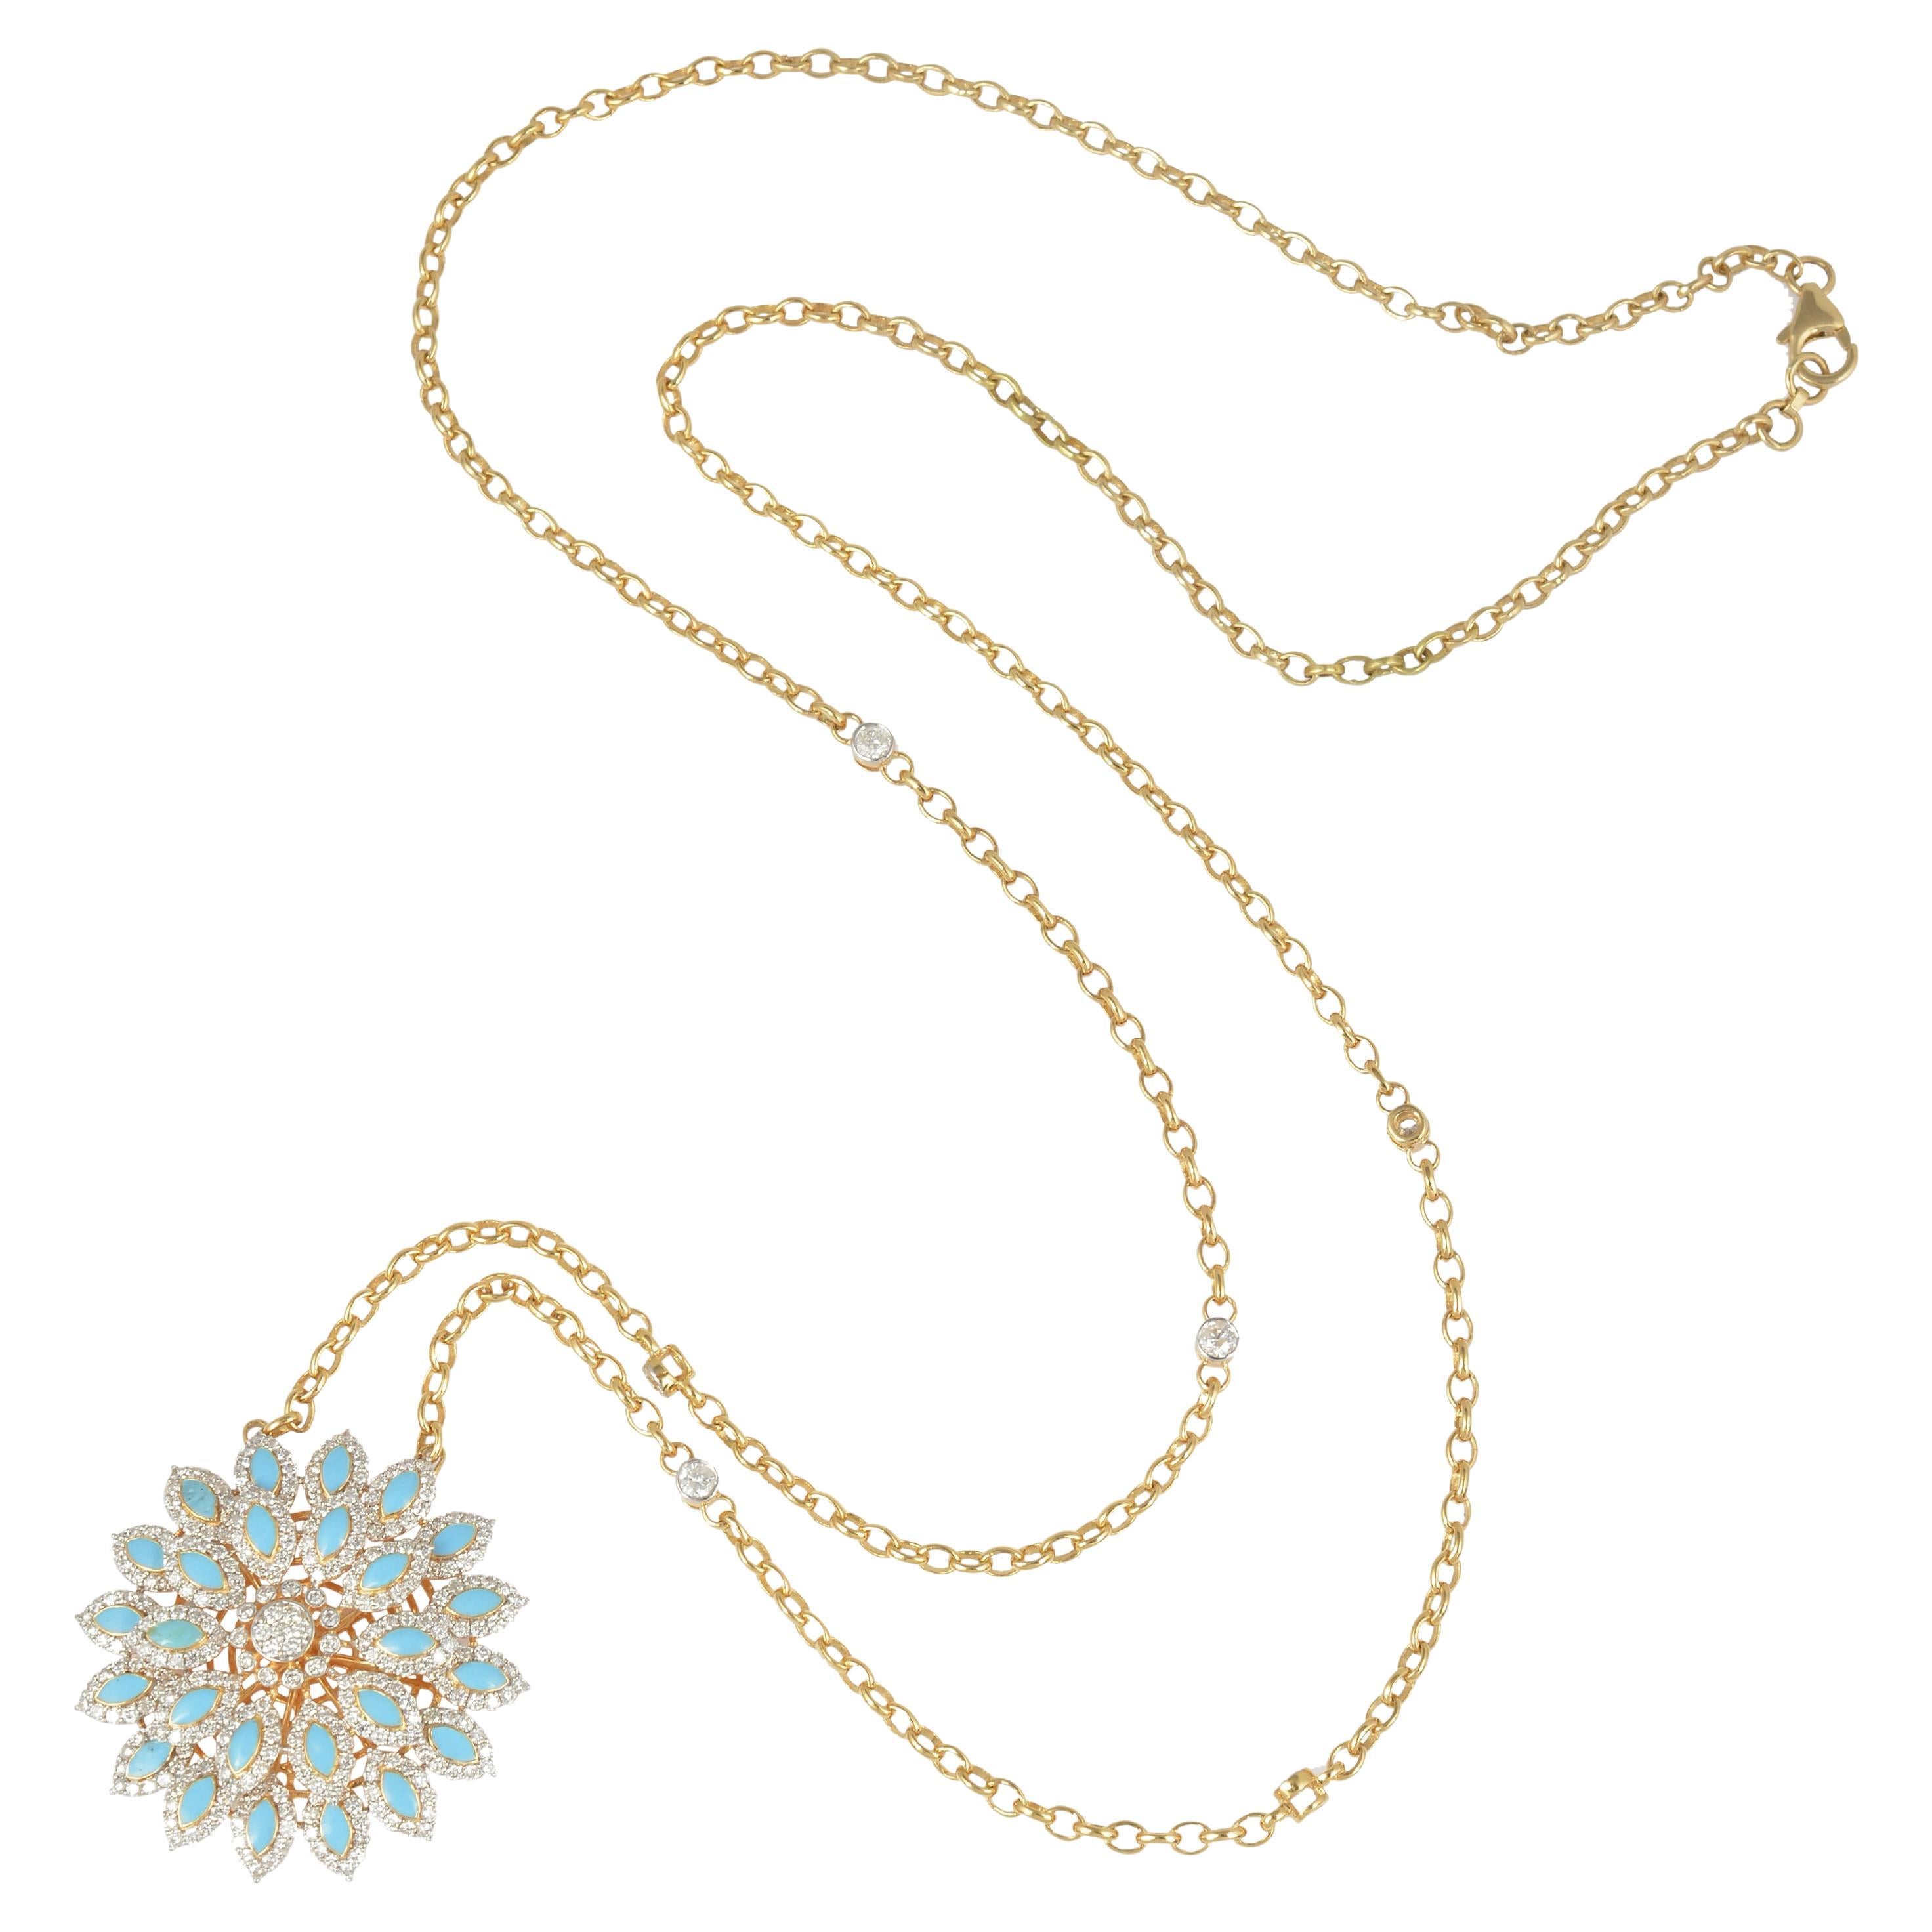 Make a bold and glamorous statement with this stunning 5.7 Carat Diamond Enamel Flower Pendant Fine Necklace. Crafted with exceptional artistry and attention to detail, this exquisite piece showcases a captivating blend of diamonds, enamel, and 18